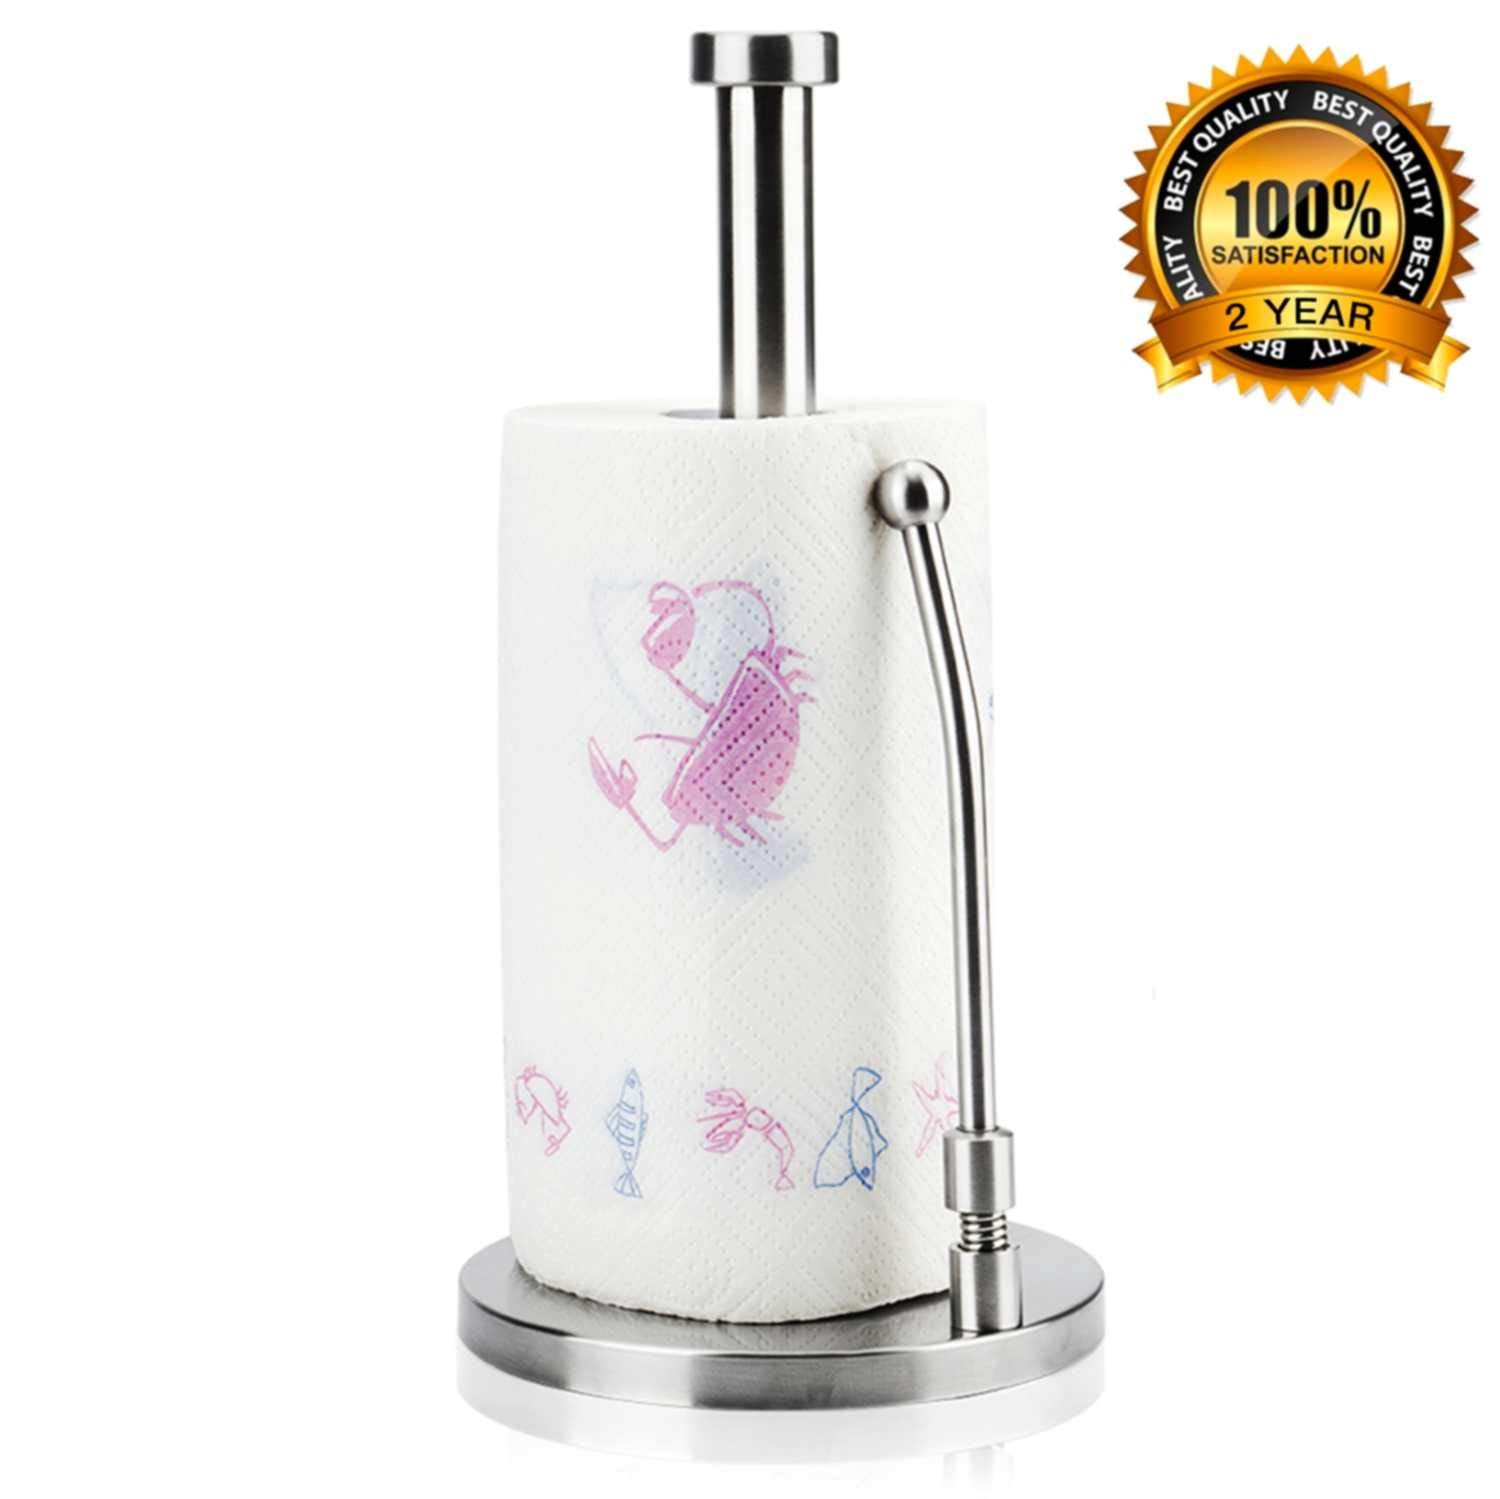 KKPOT Kitchen Standing Paper Towels Holder,Stainless Steel Countertop Rack for Tissue and Napkin in Roll